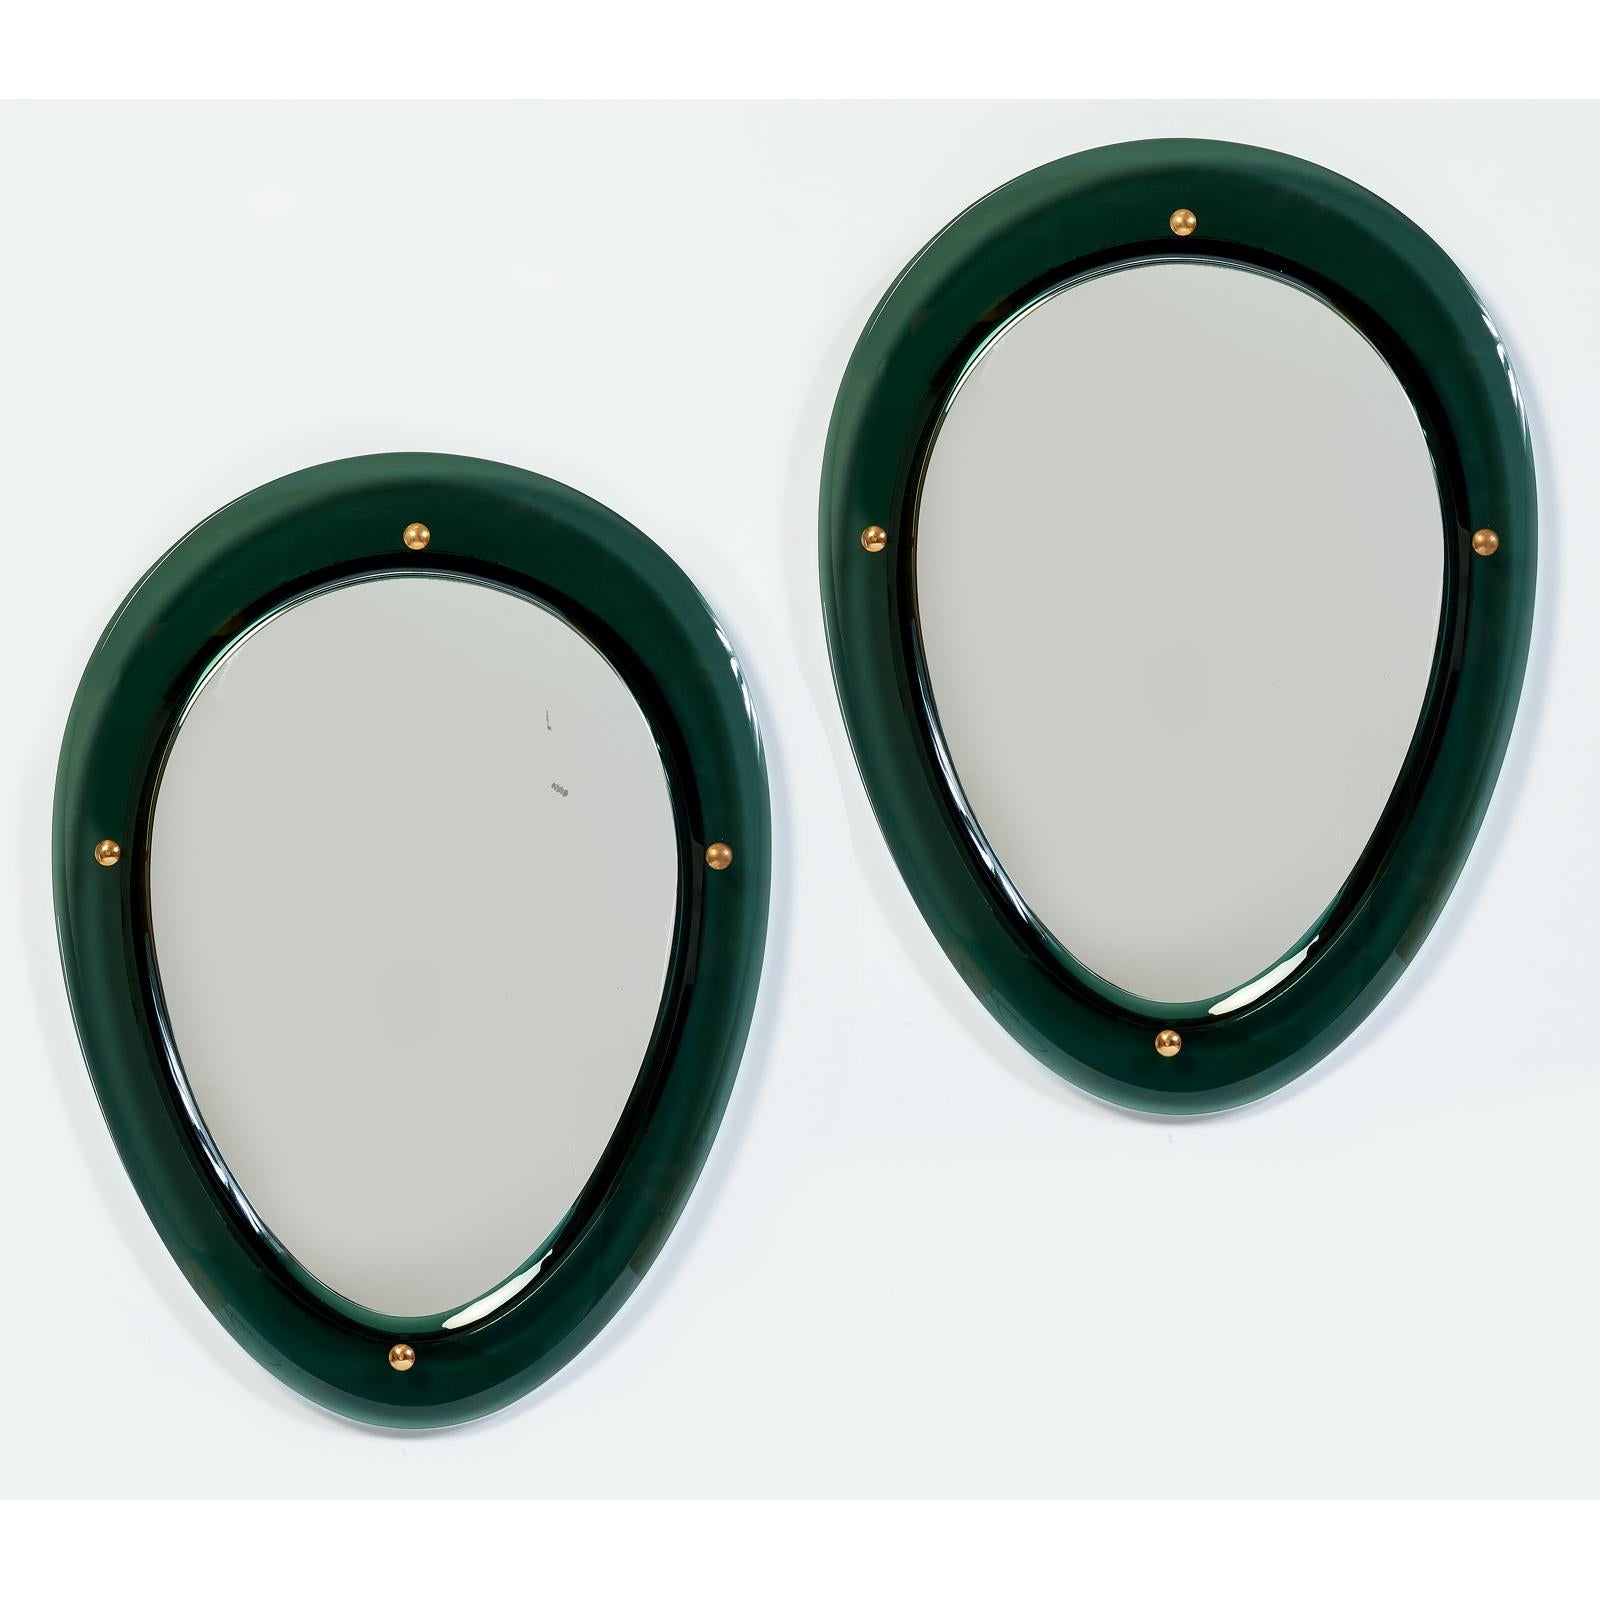 Mid-Century Modern Pair of Oval Shaped Colored Glass Mirrors, Italy, 1950s